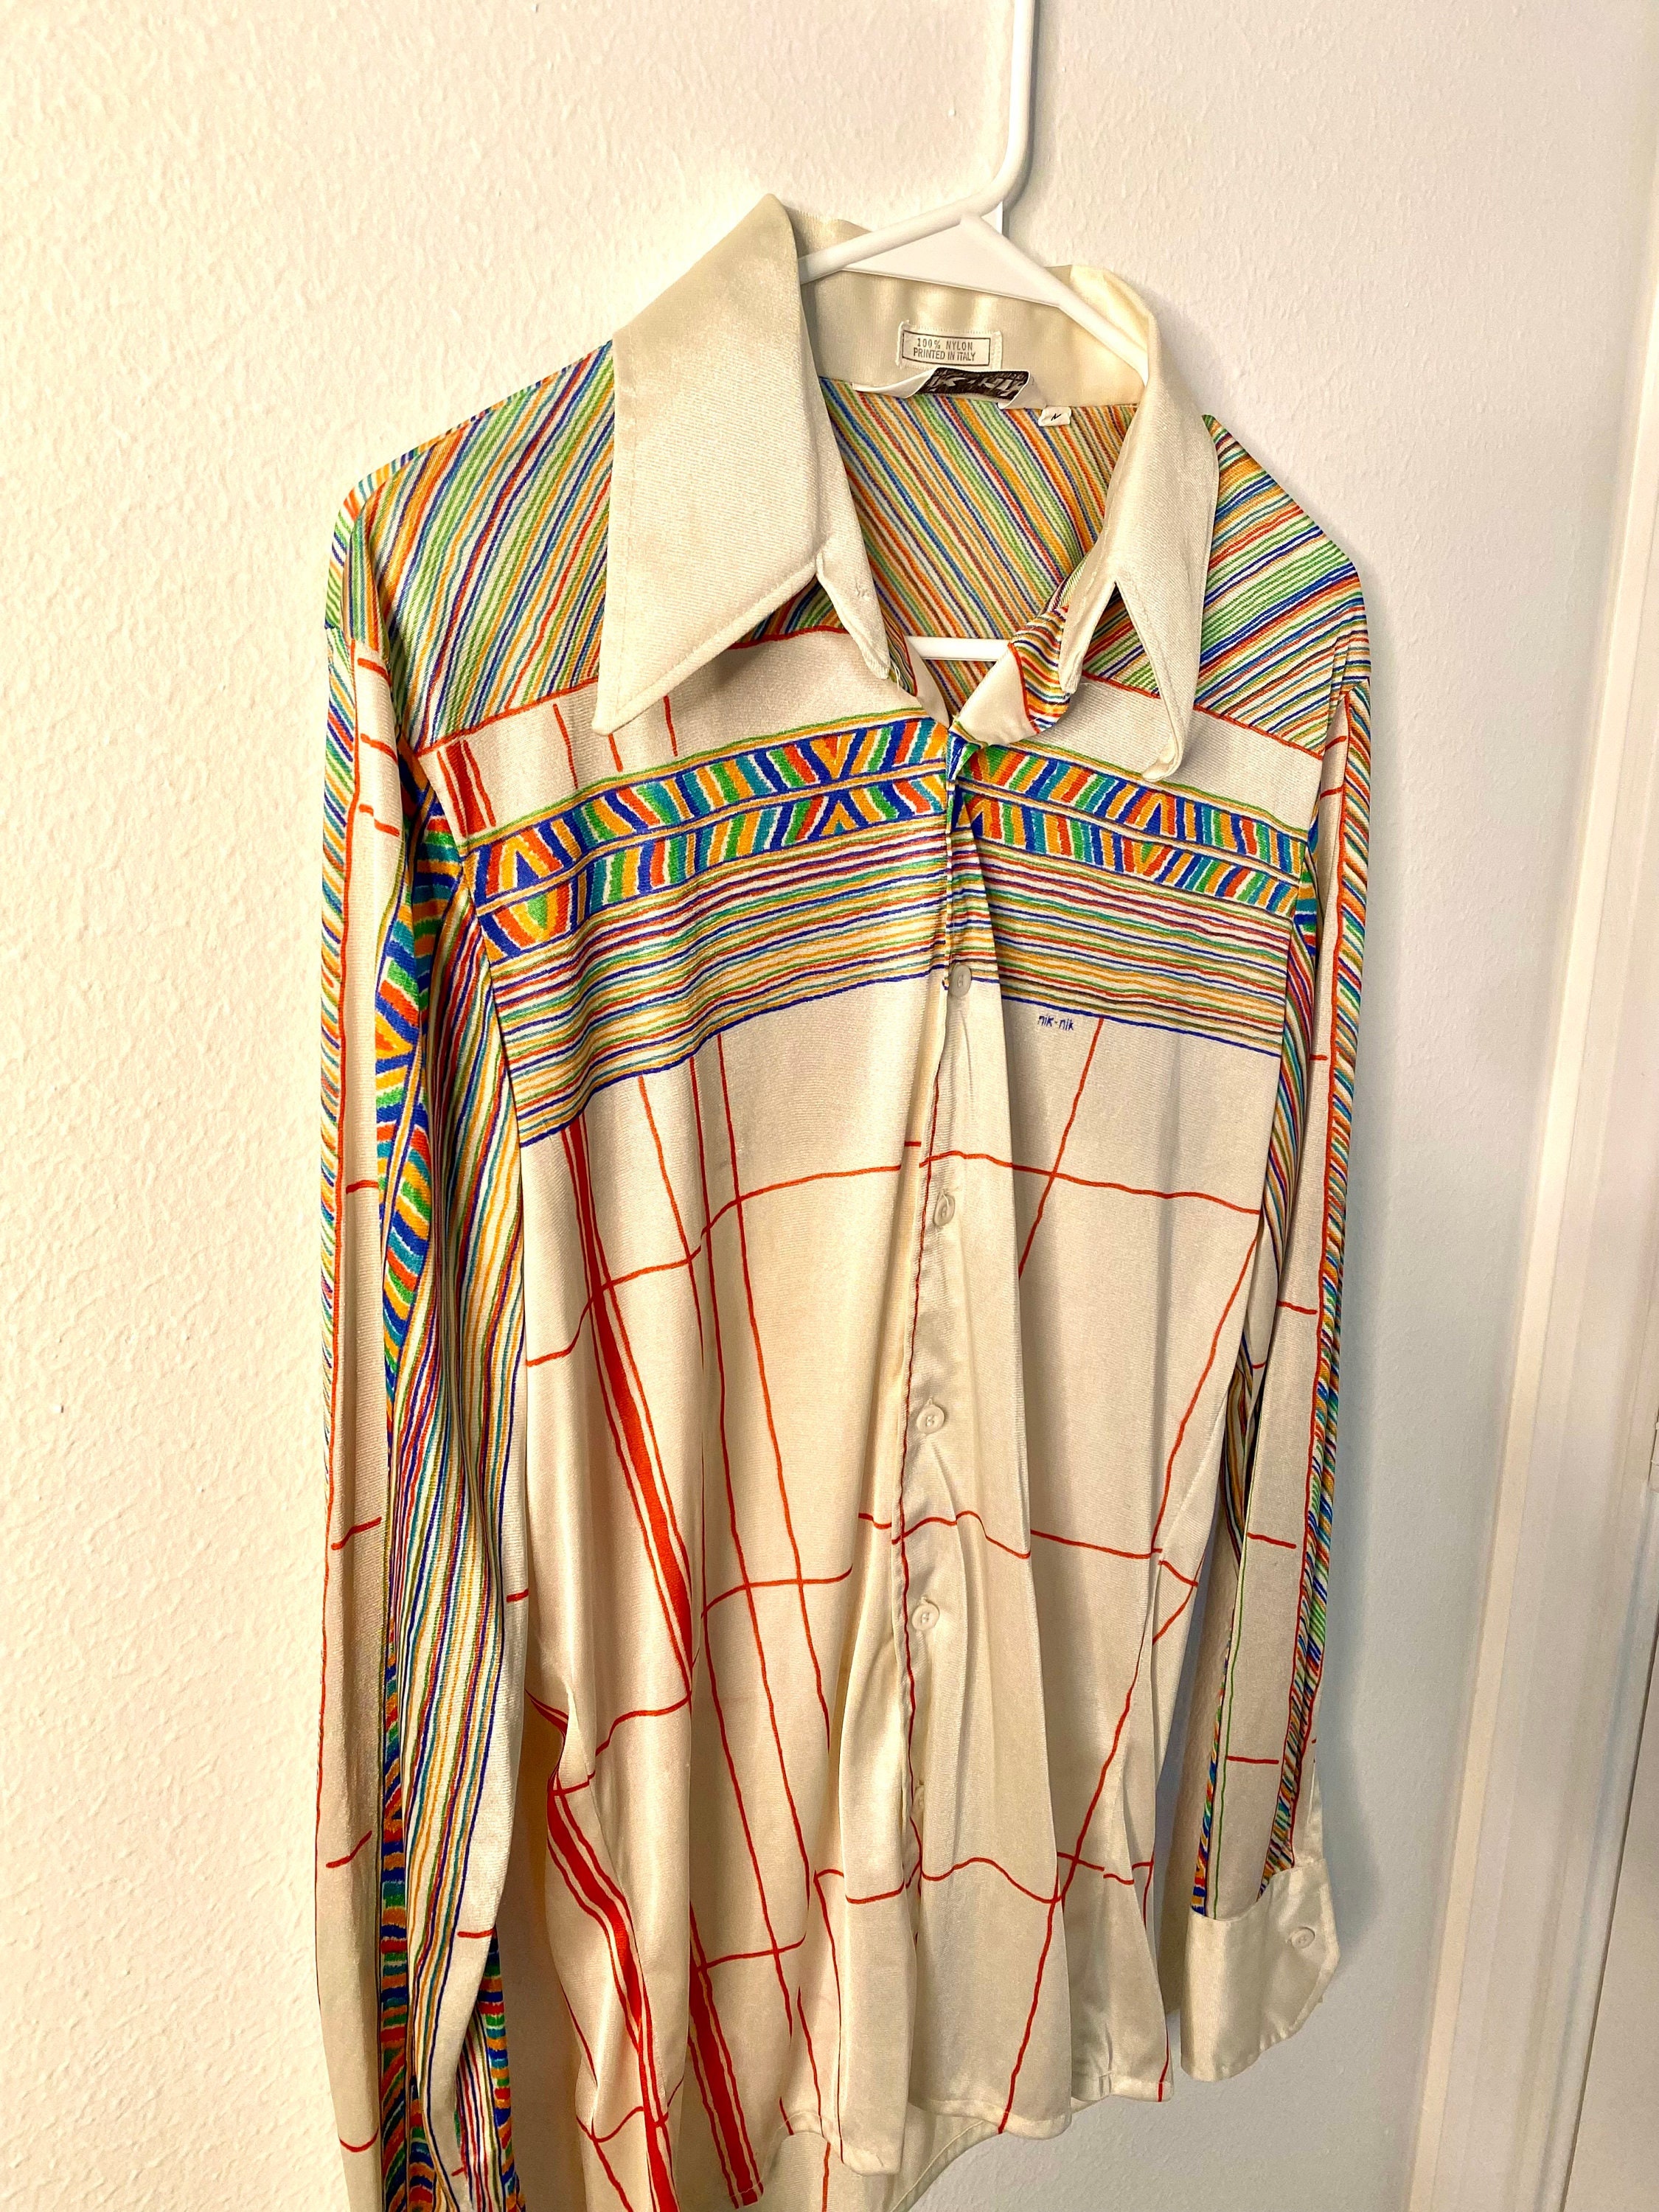 Vintage 70s nik Nik Nylon Disco Shirt With Stripes and Bright Colors. Retro  Fitted Button up Shirt. 